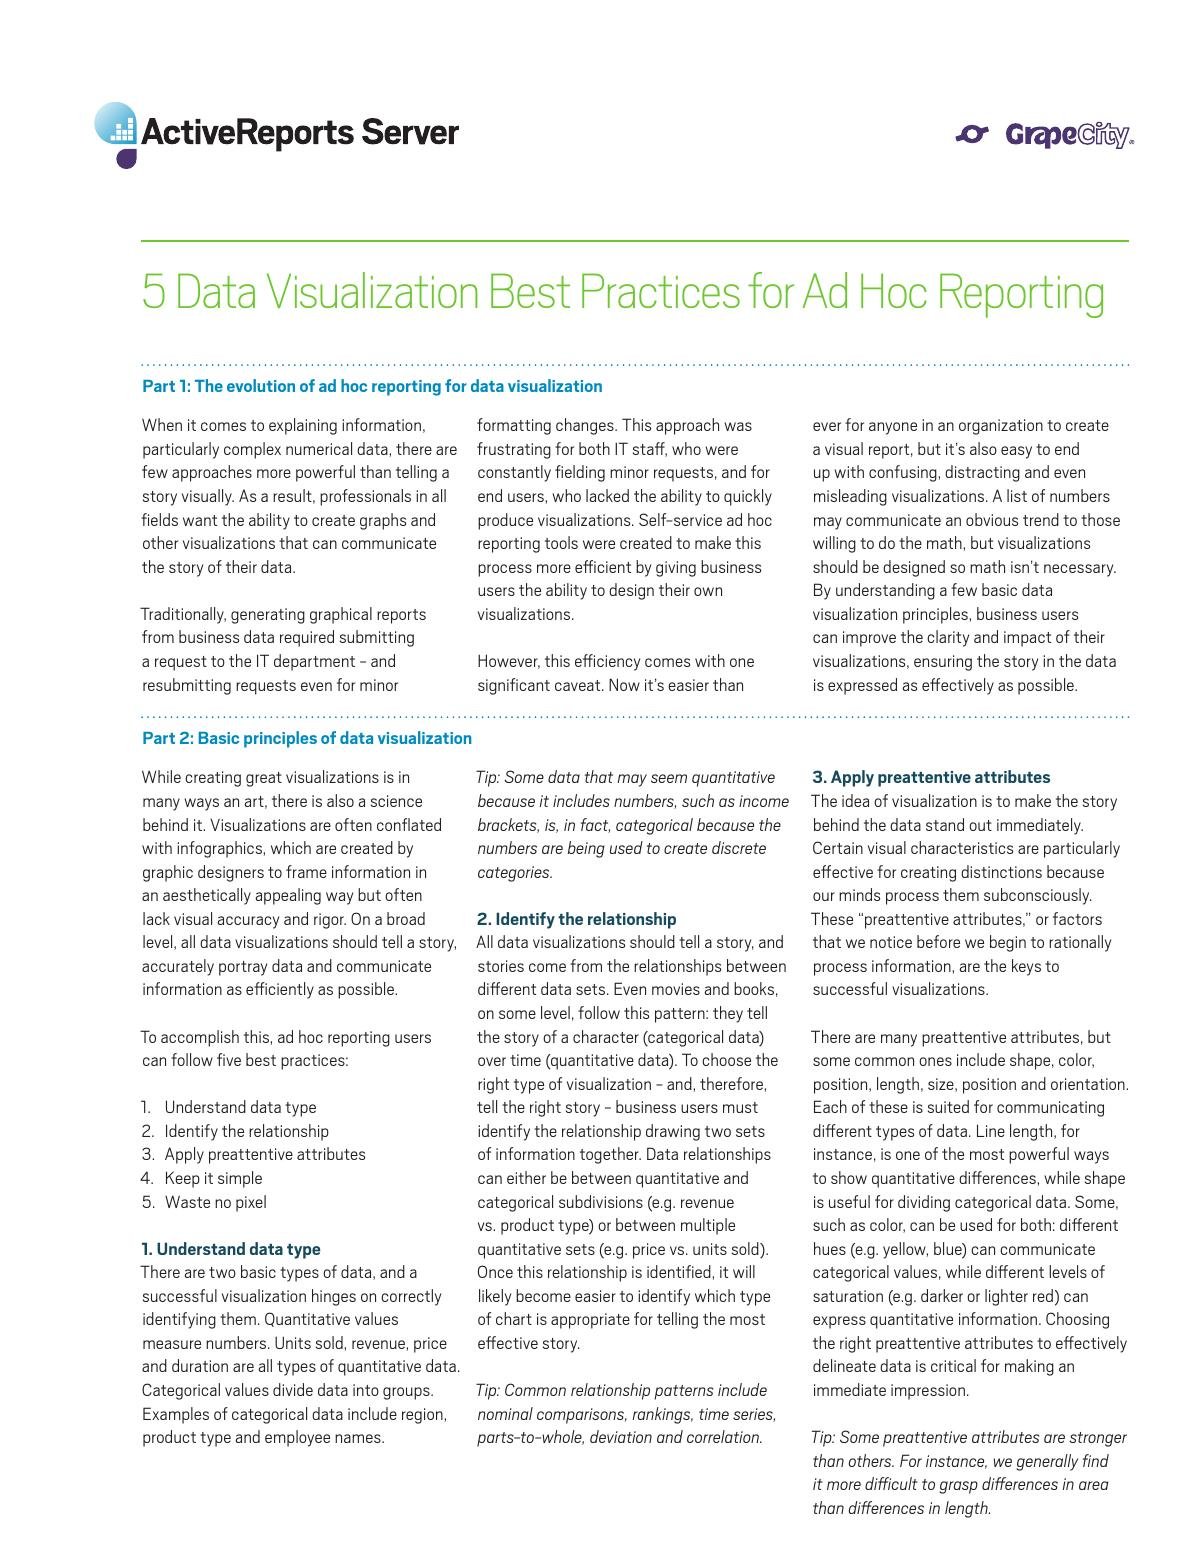 5 Data Visualization Best Practices for Ad Hoc Reporting